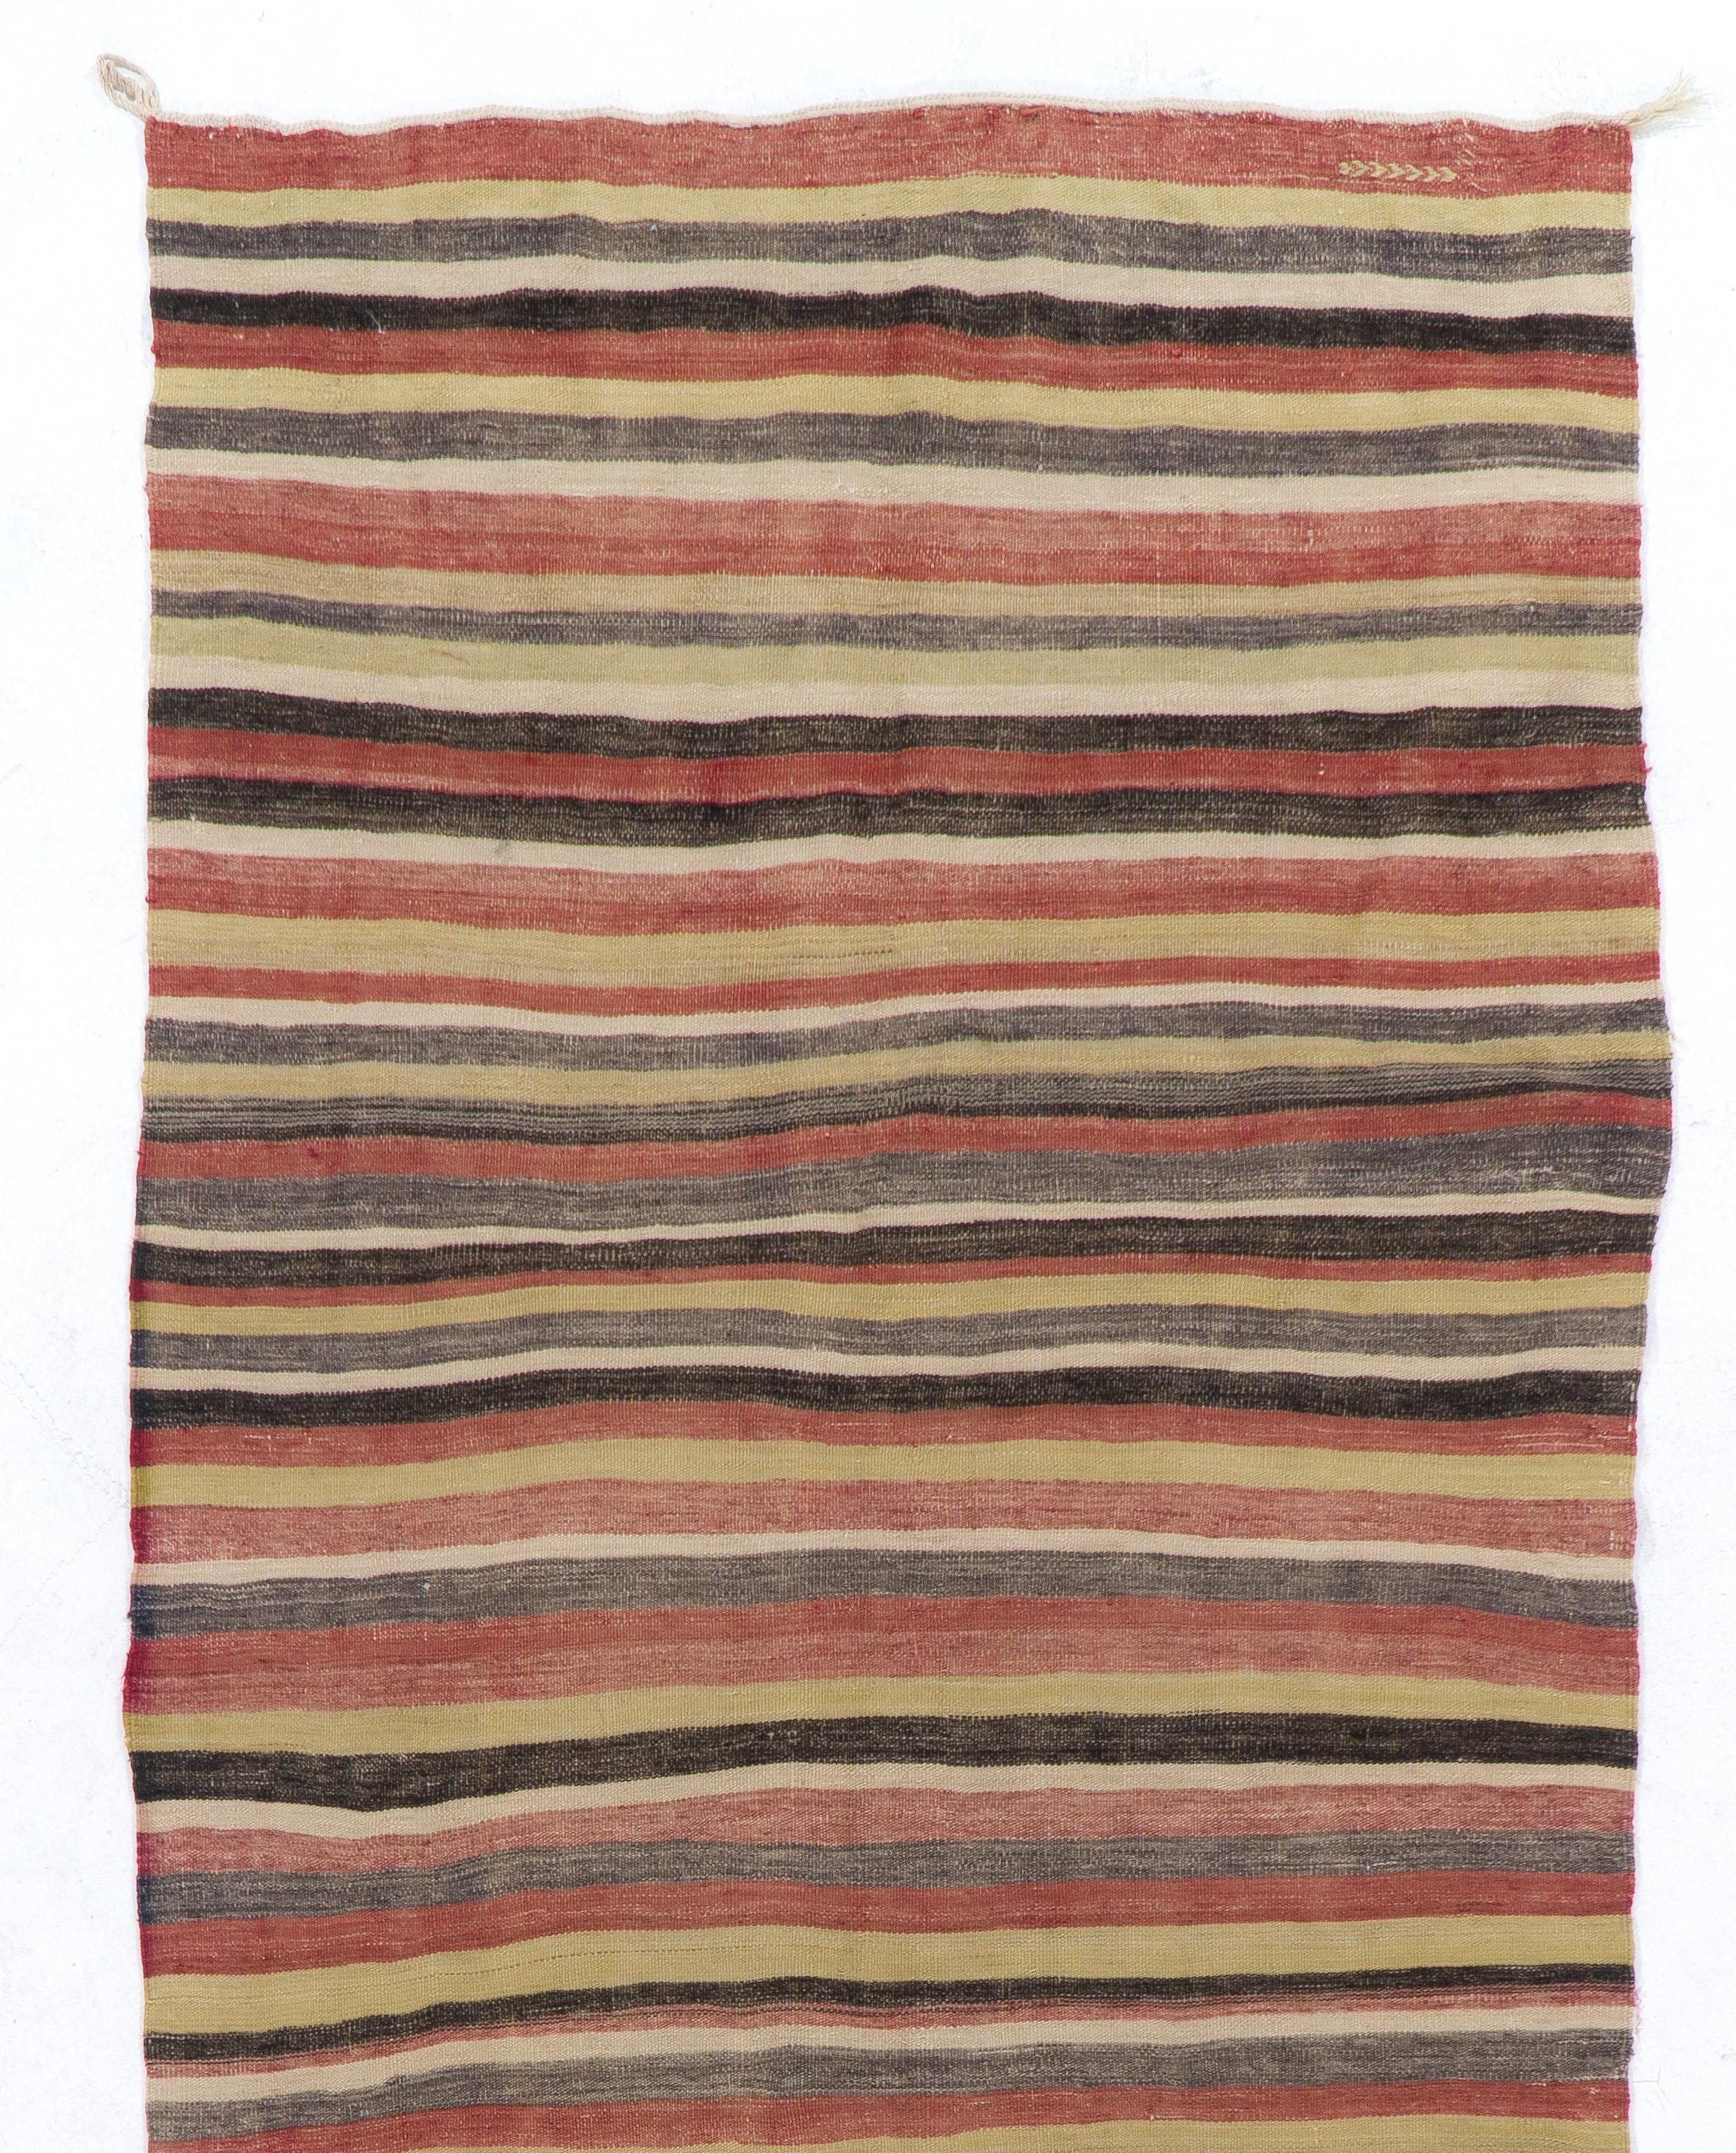 A vintage hand-made flat-woven Turkish kilim runner rug made of natural organic wool with a simple banded design in rust red, dark gray, soft celadon green, black and beige. 

The rug is in good condition with no issues, it is lightweight,